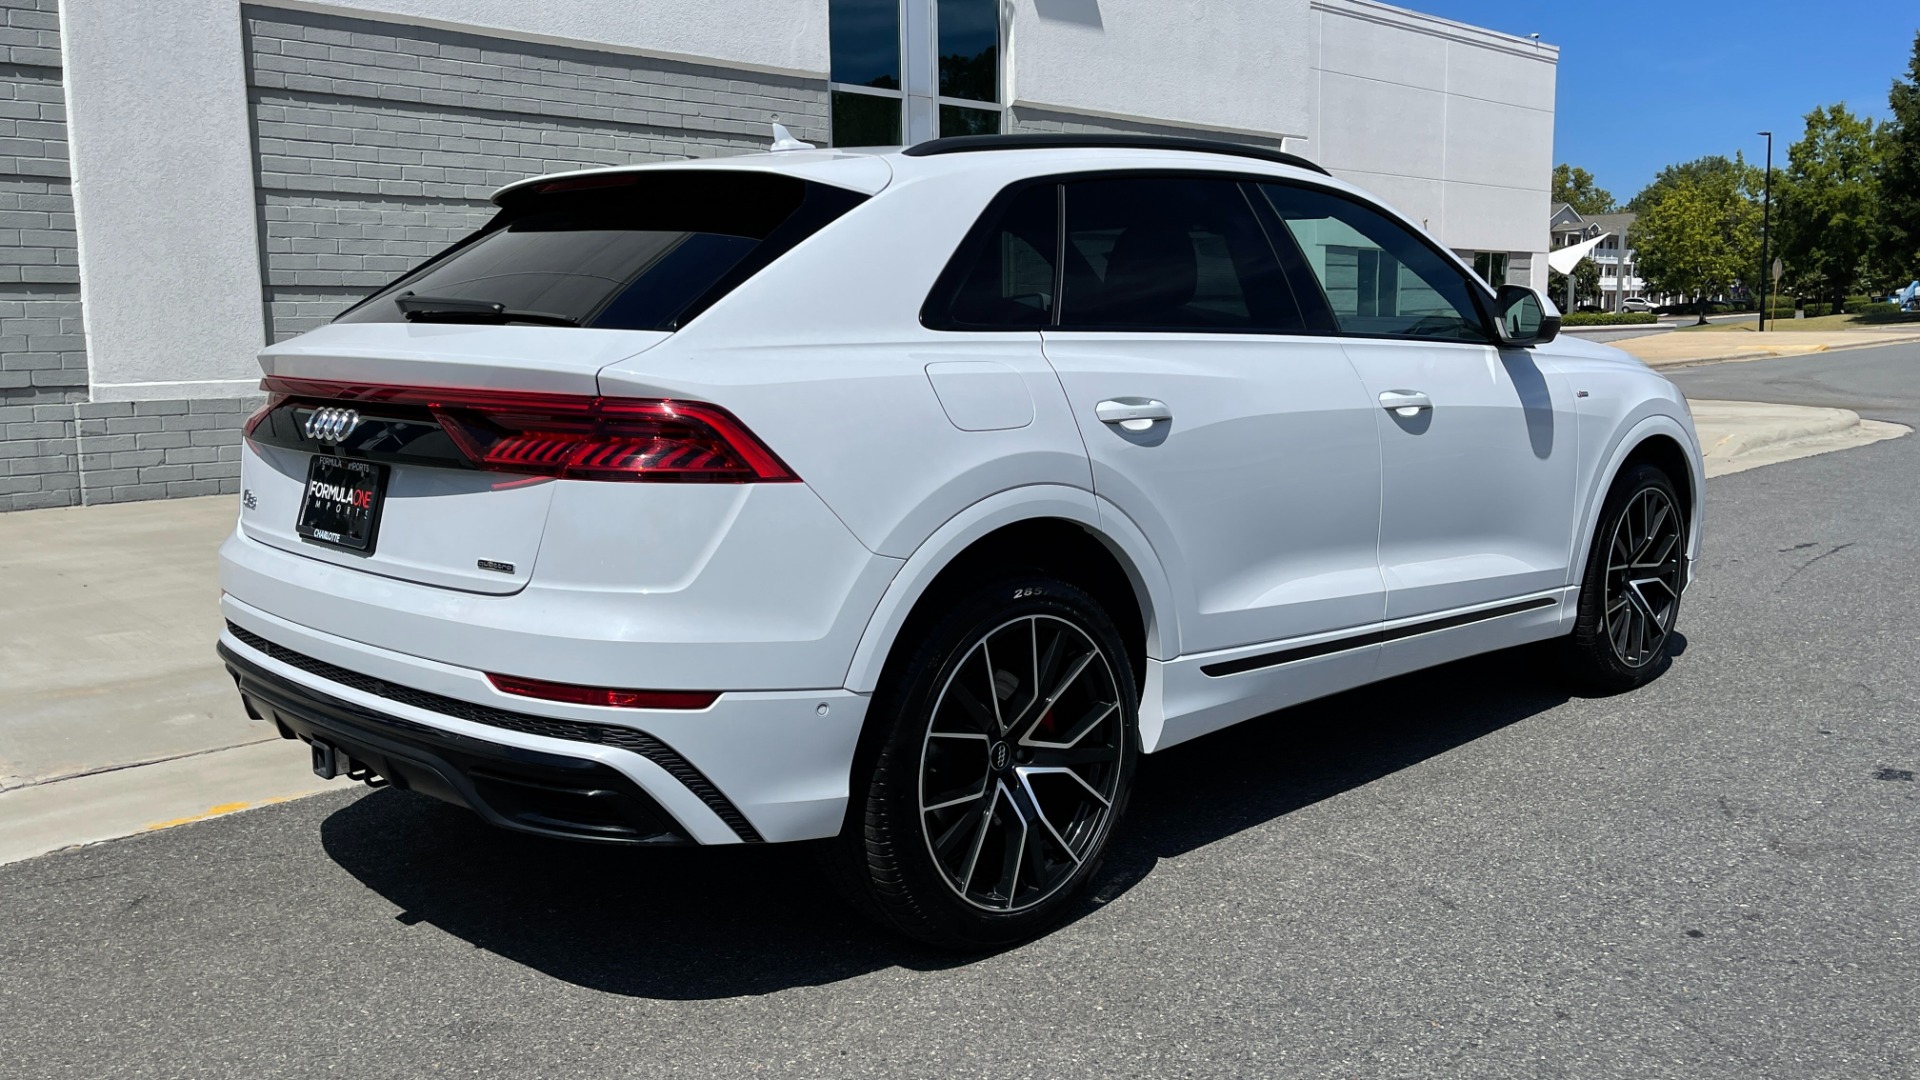 Used 2020 Audi Q8 PREMIUM PLUS / NAV / S-LINE / TOWING / BLACK OPTIC / B&O SND / REARVIEW for sale Sold at Formula Imports in Charlotte NC 28227 7